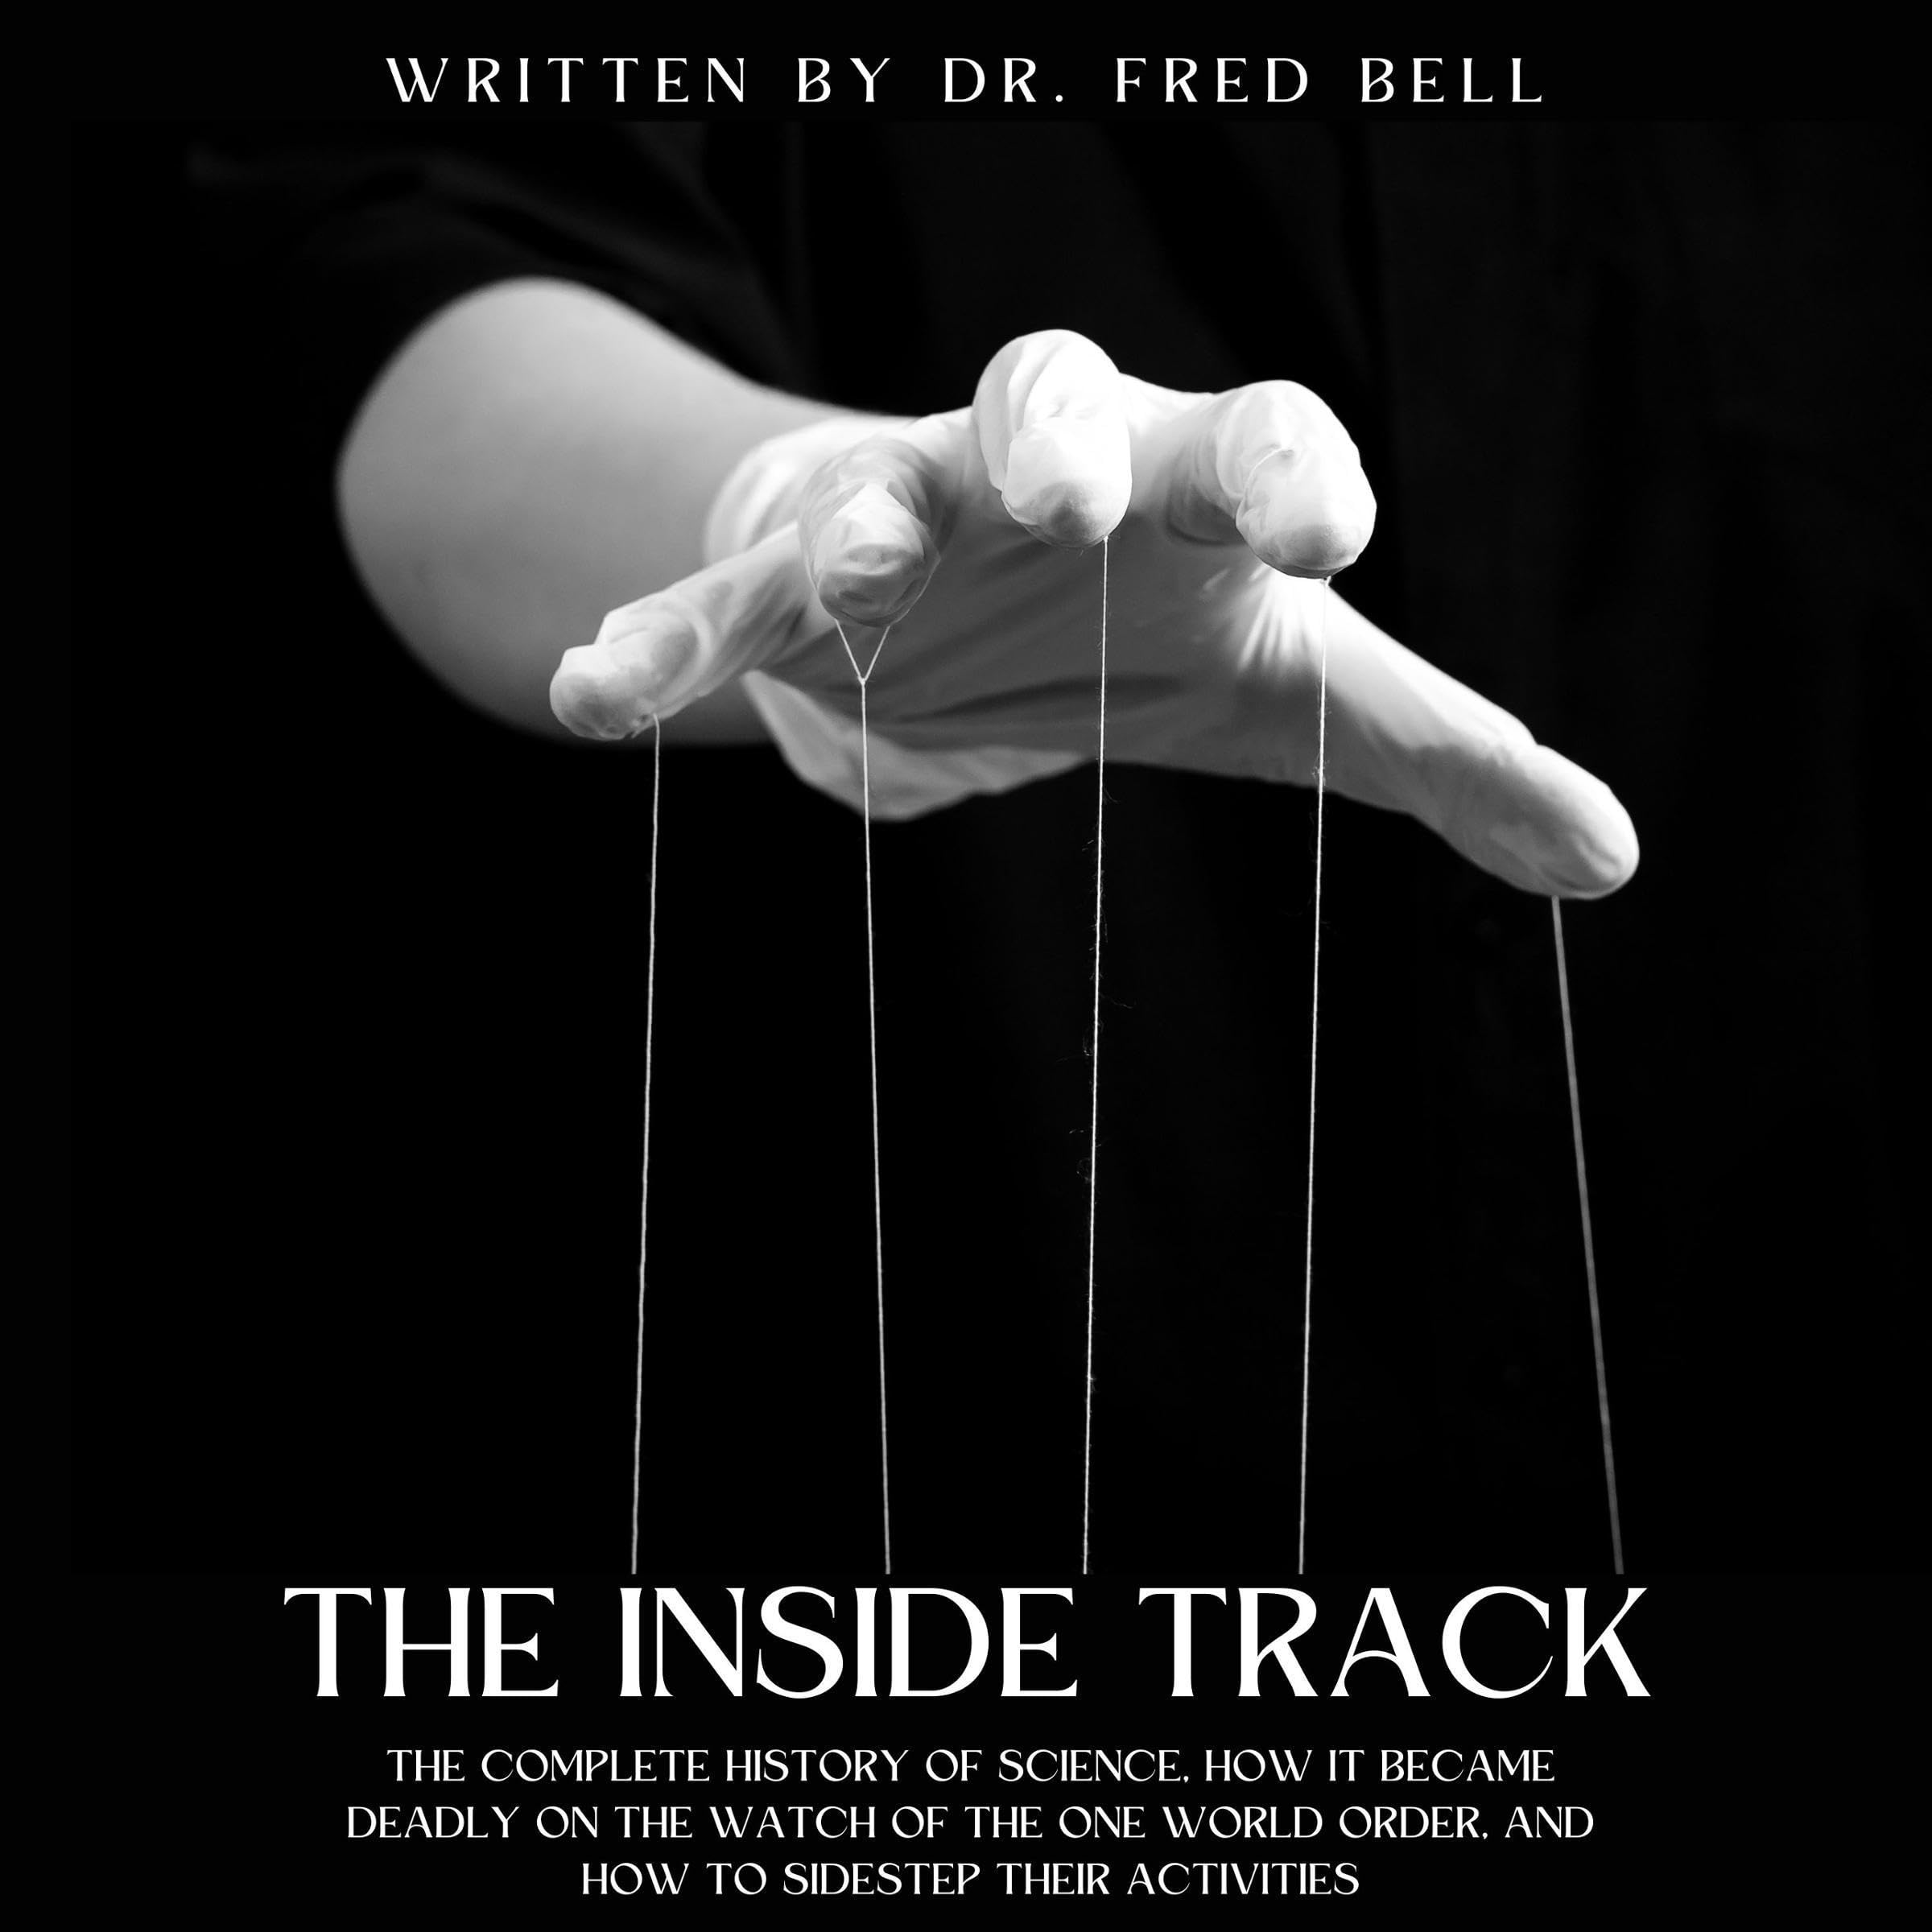 The Inside Track by Dr. Fred Bell: The Complete History of Science, How It Became Deadly on the Watch of the One World Order, and How to Sidestep Their Activities